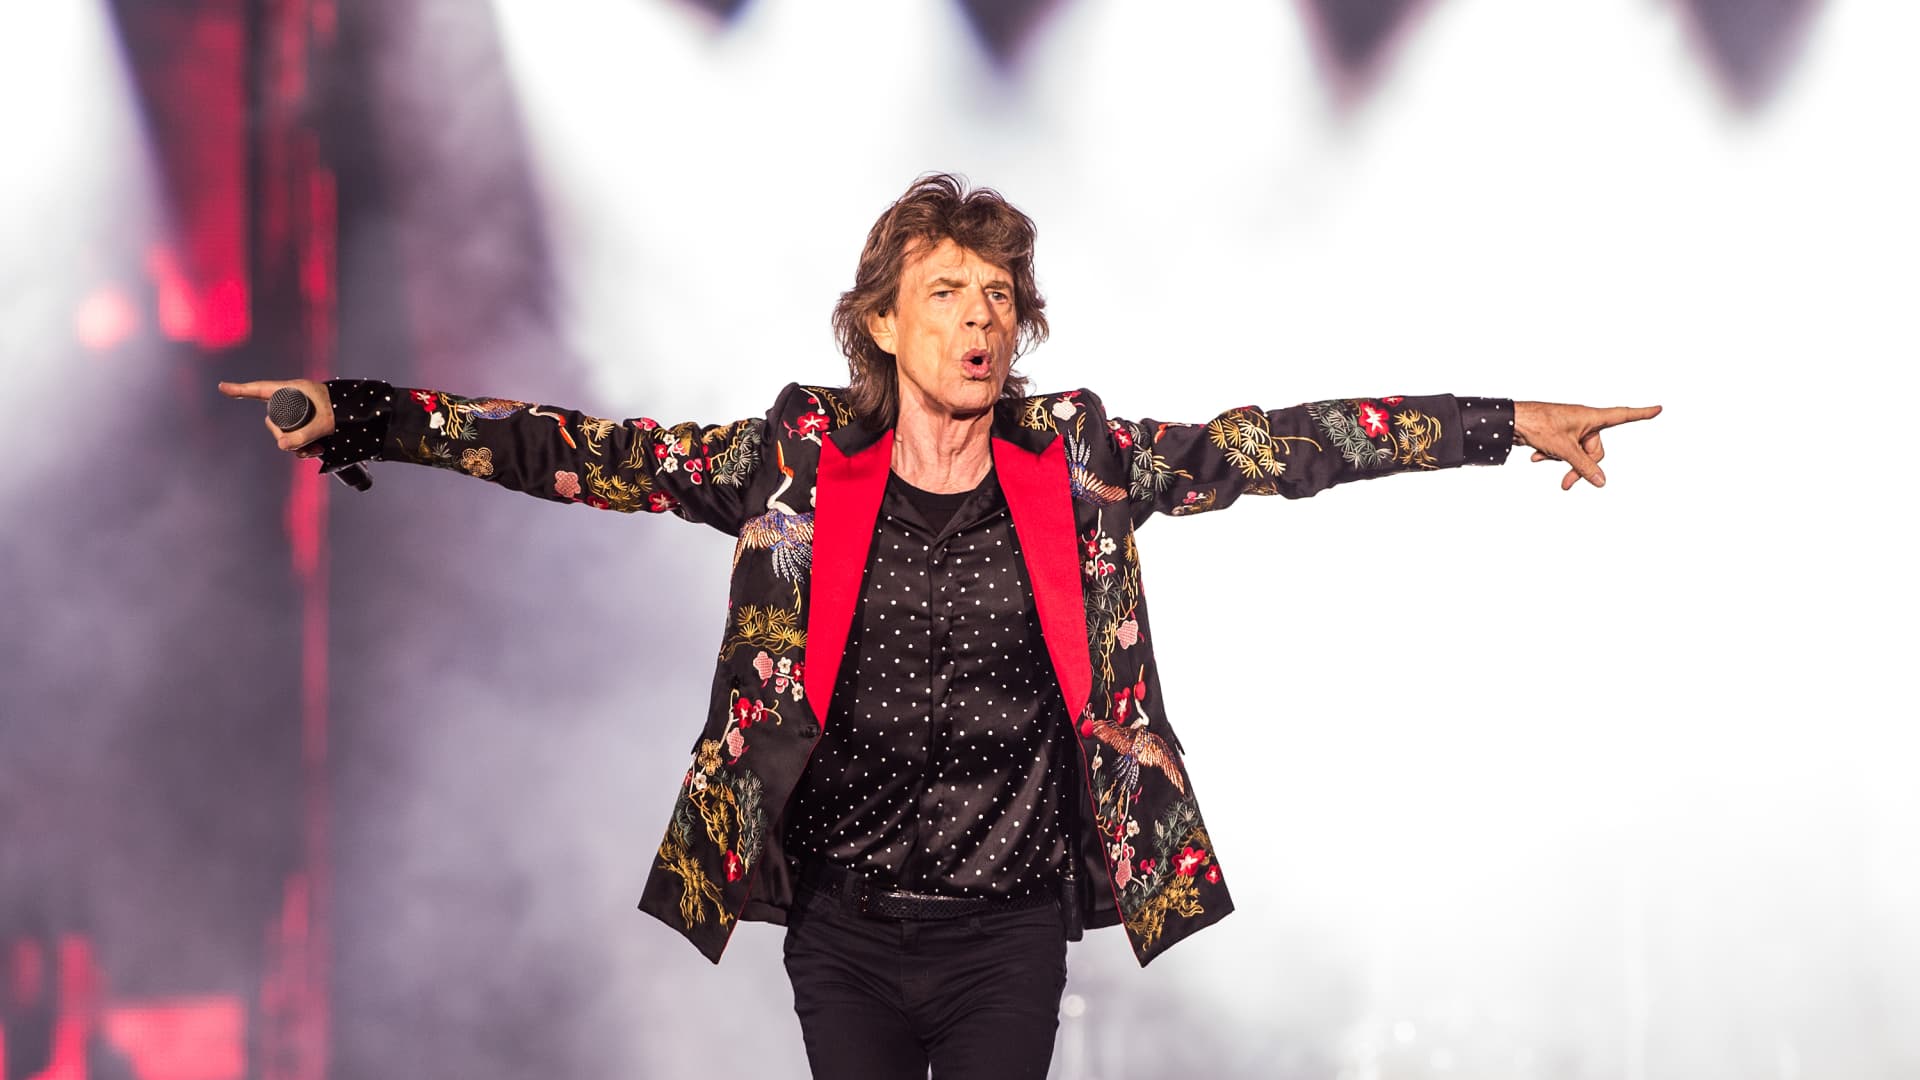 ‘[My] youngsters will not will need $500 million’: Mick Jagger suggests Rolling Stones have no ideas to promote new music catalog